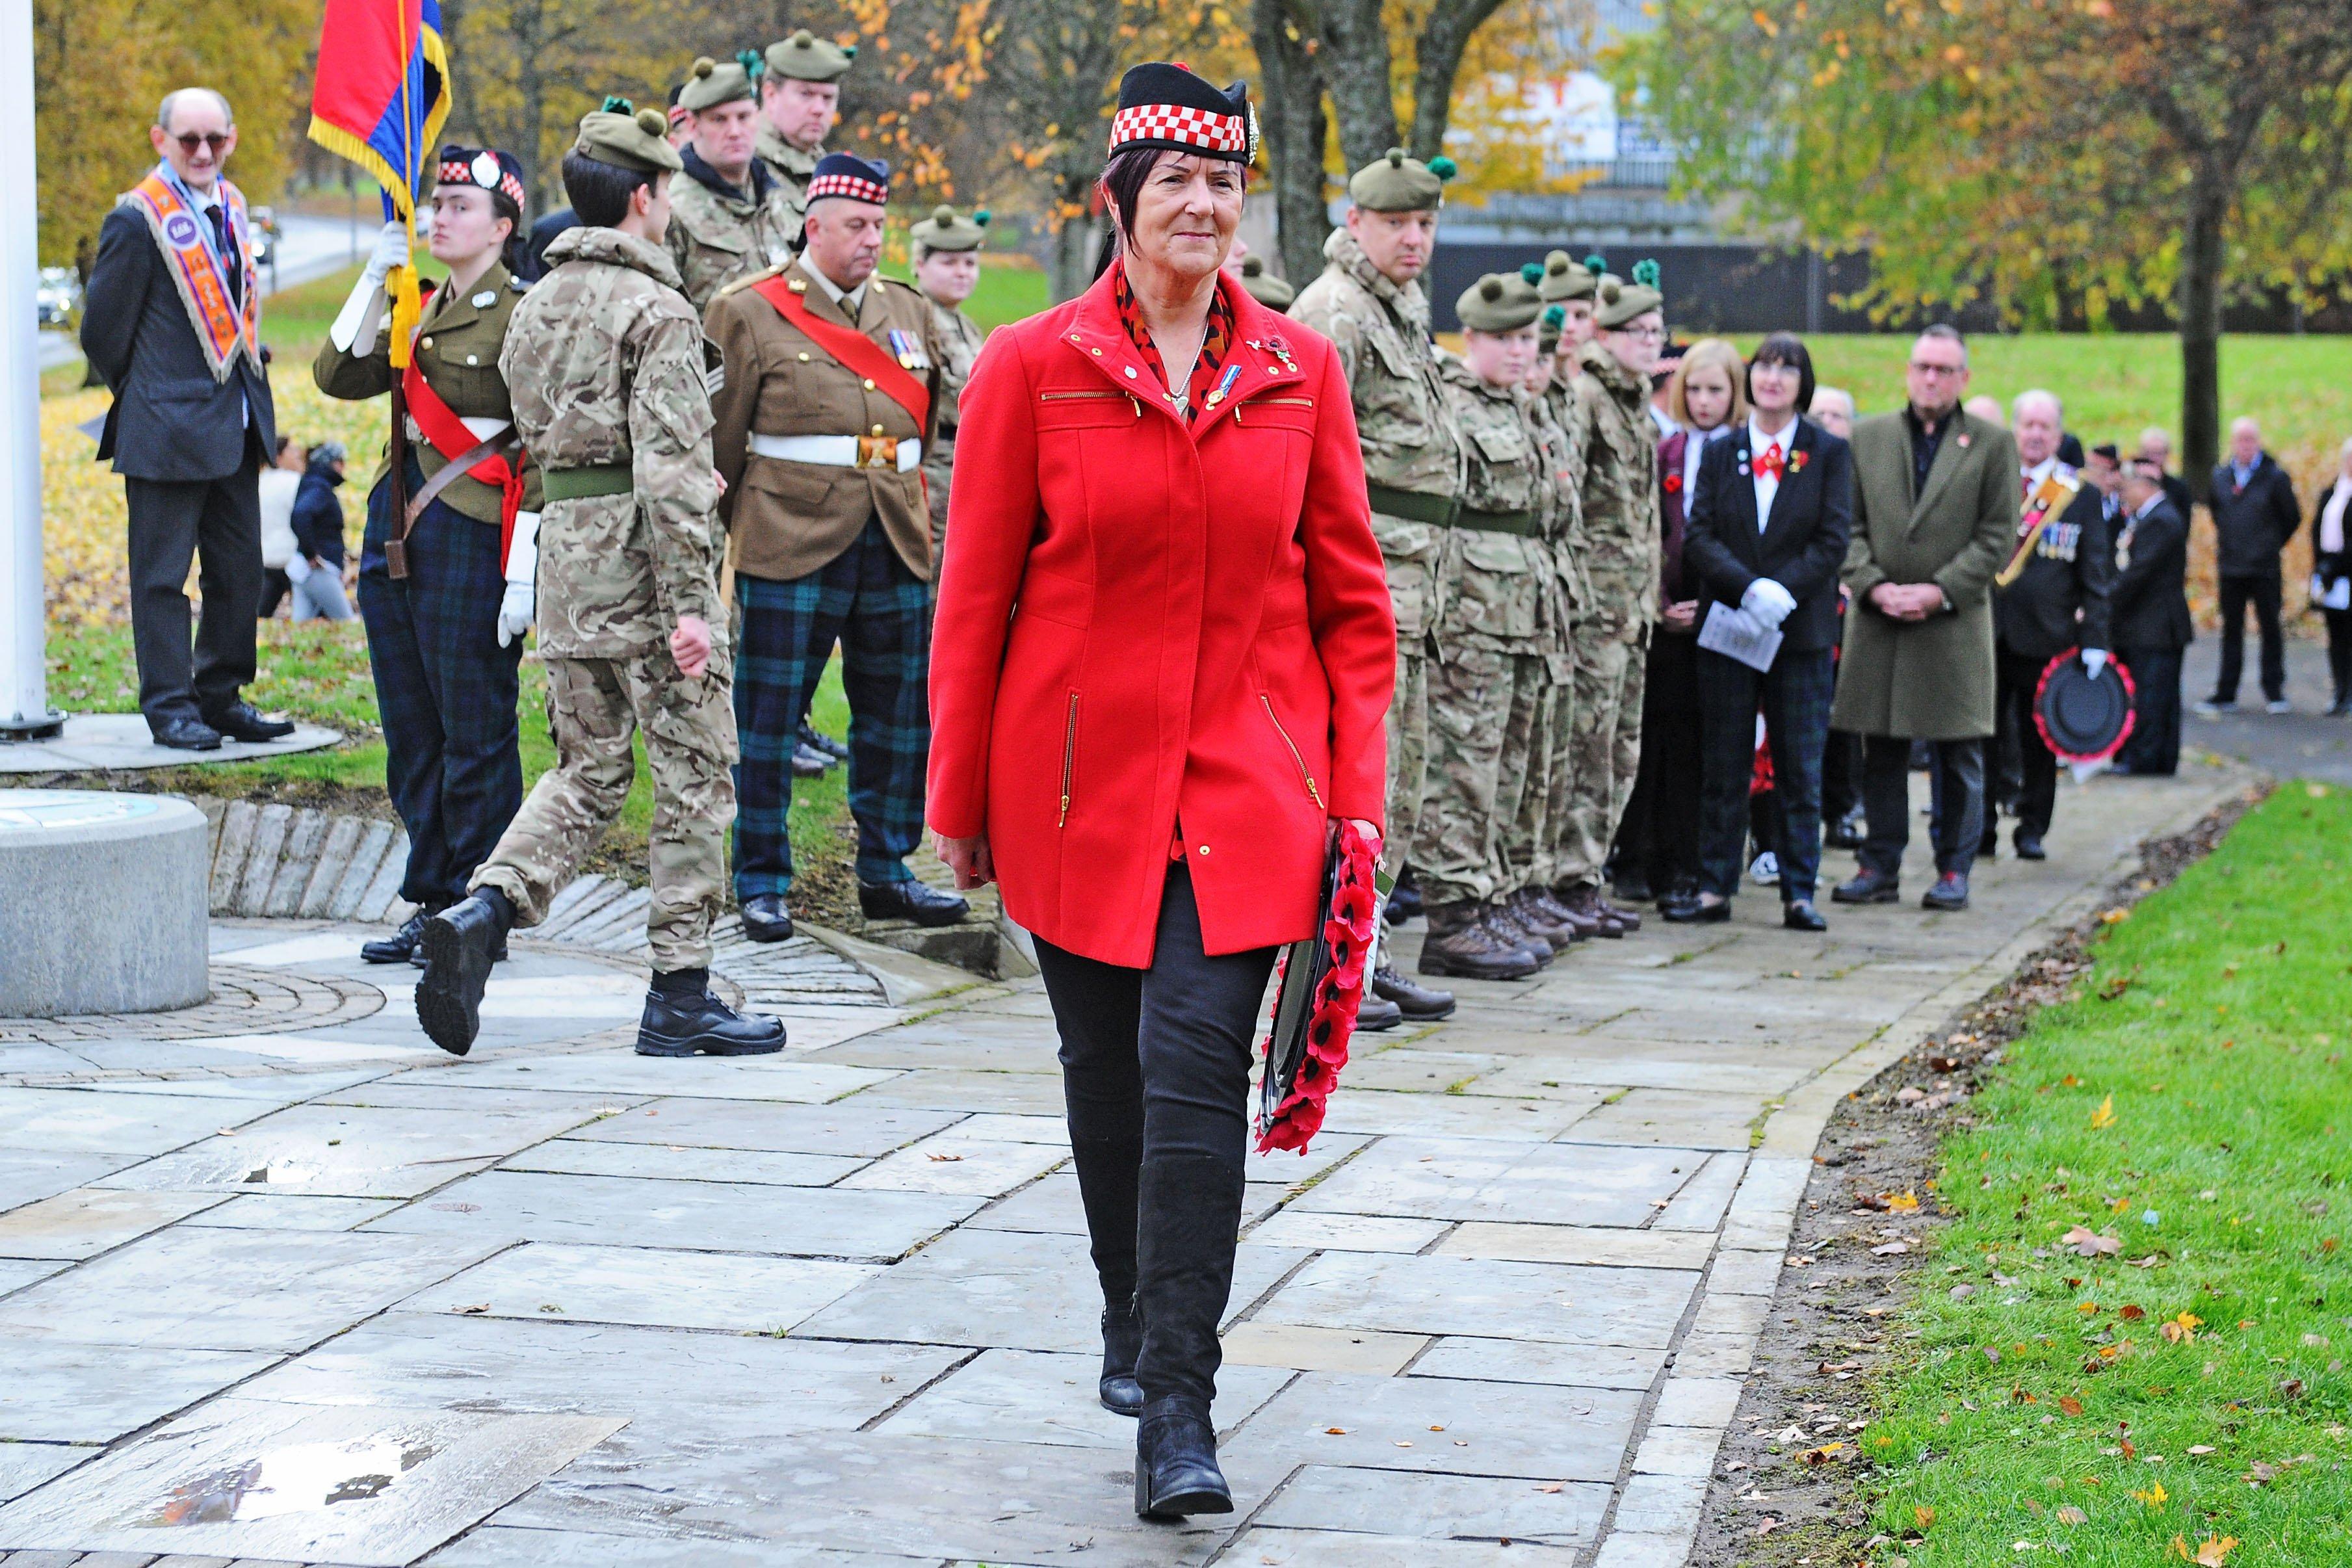 Remembrance Day Service at Camelon War Memorial. Picture by Michael Gillen.